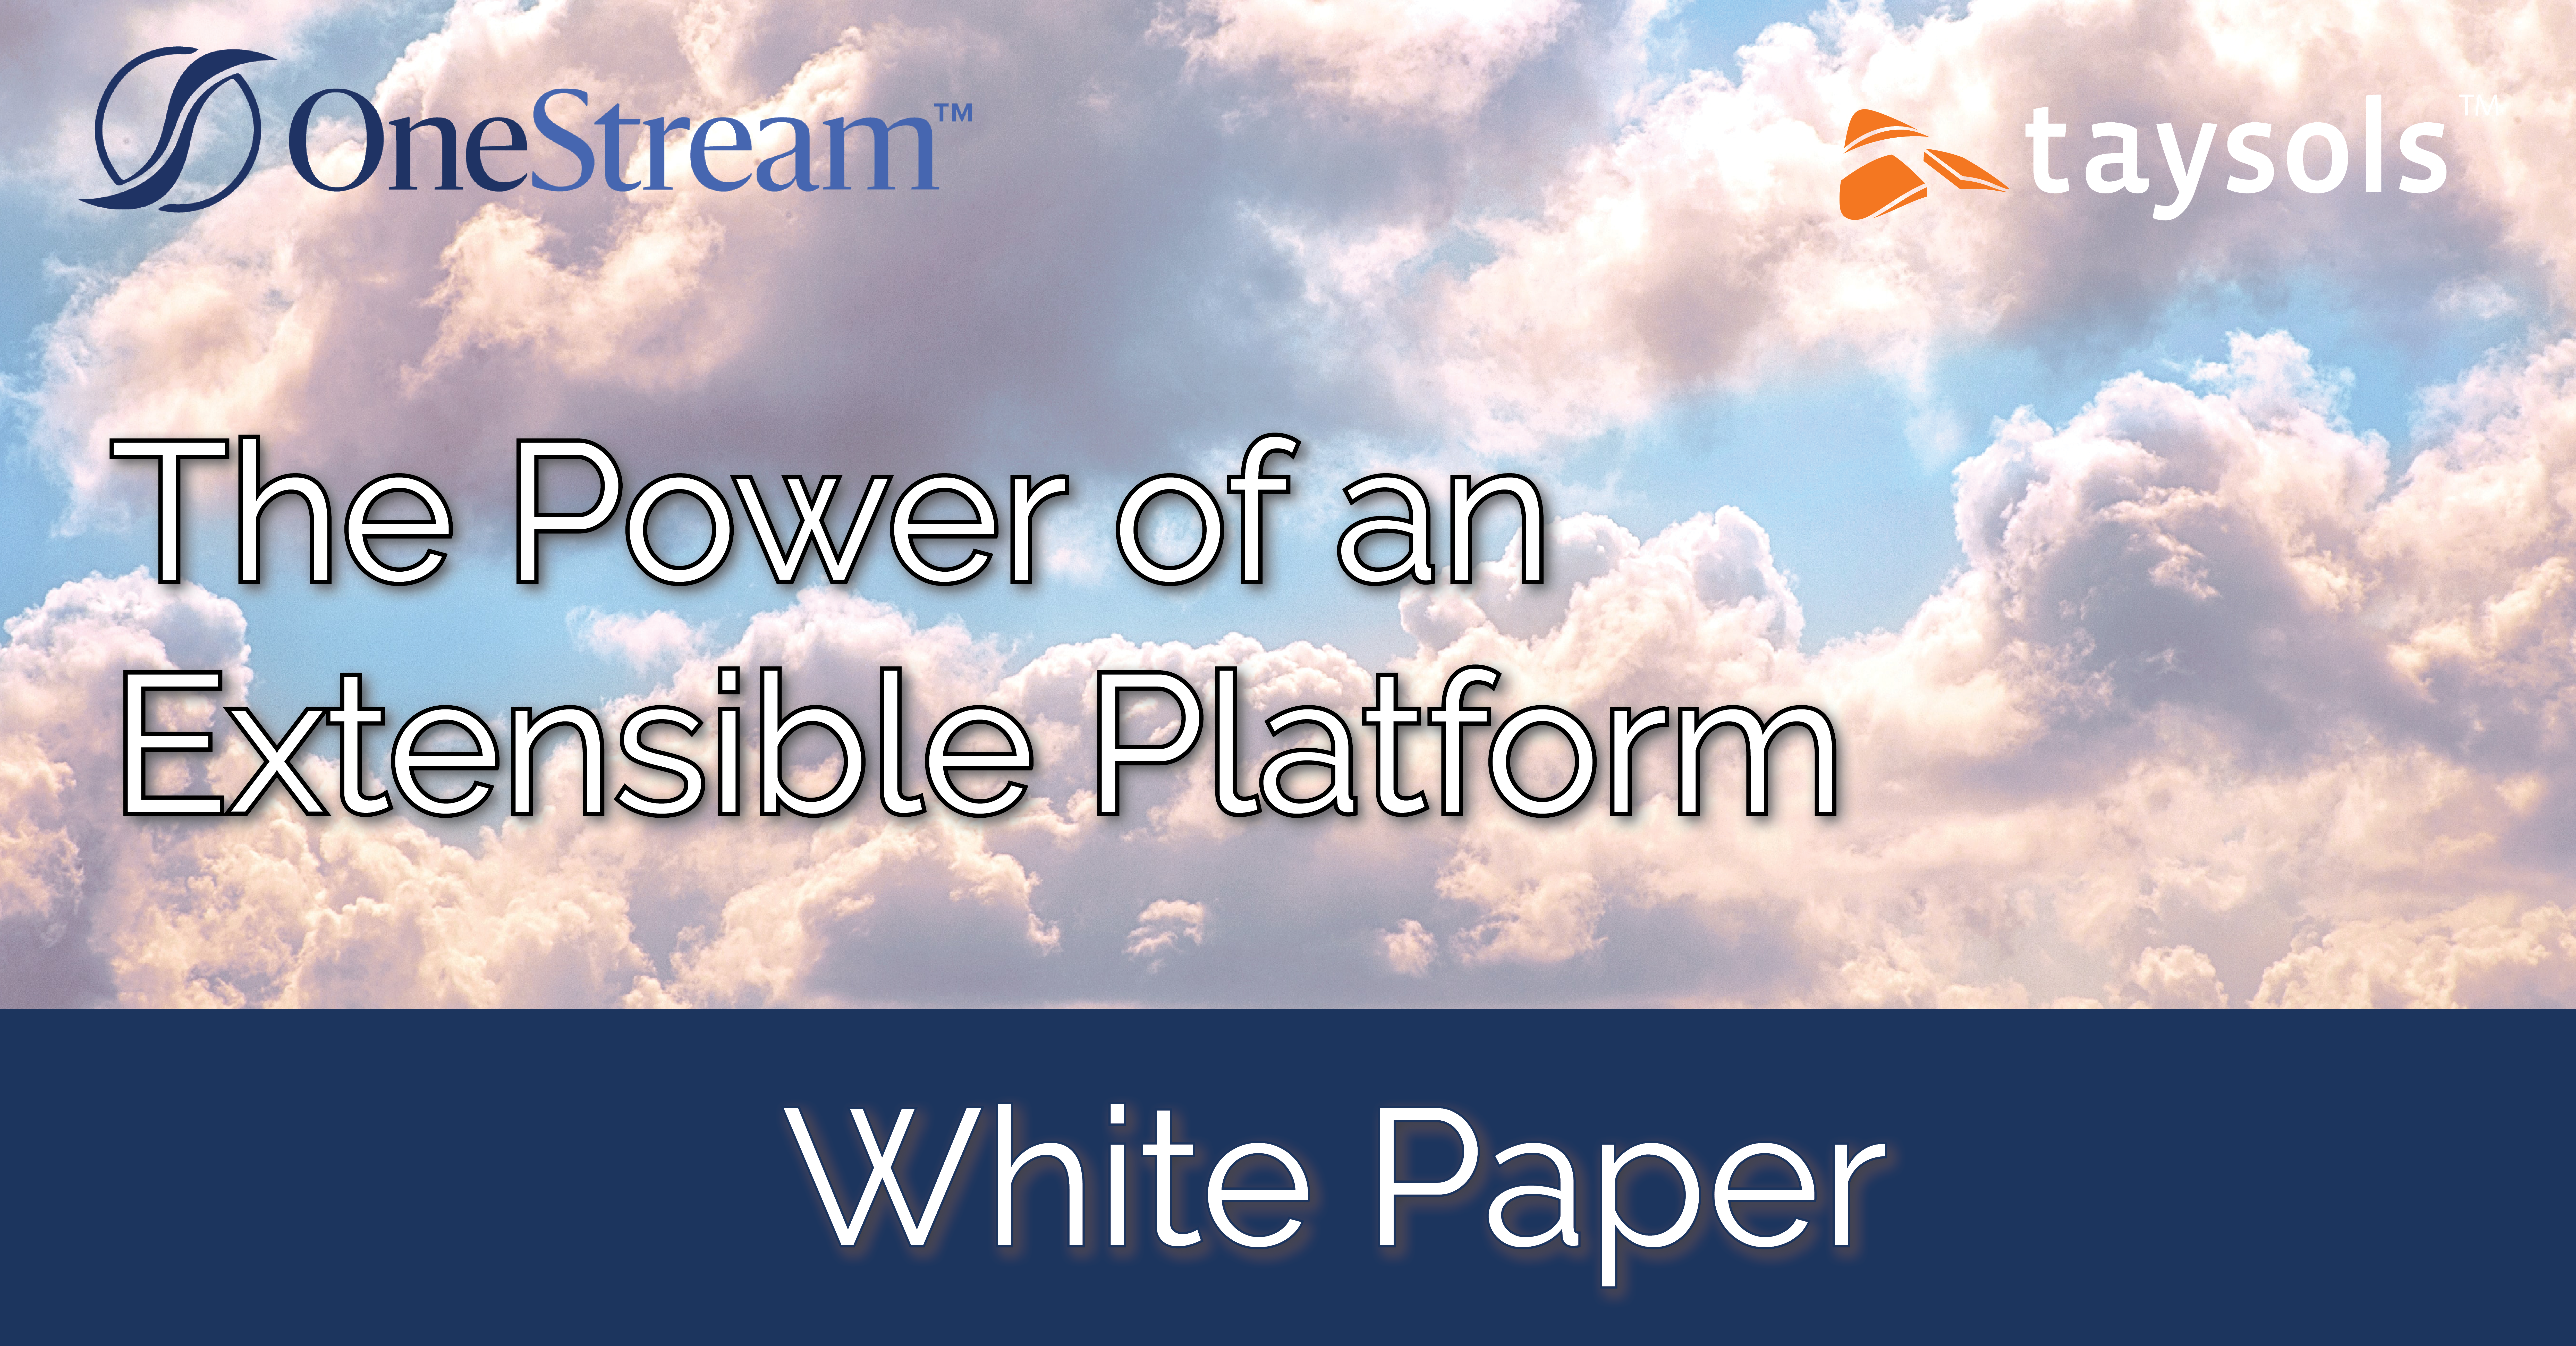 taysols_onestream white paper power of an extensible platform image_220506